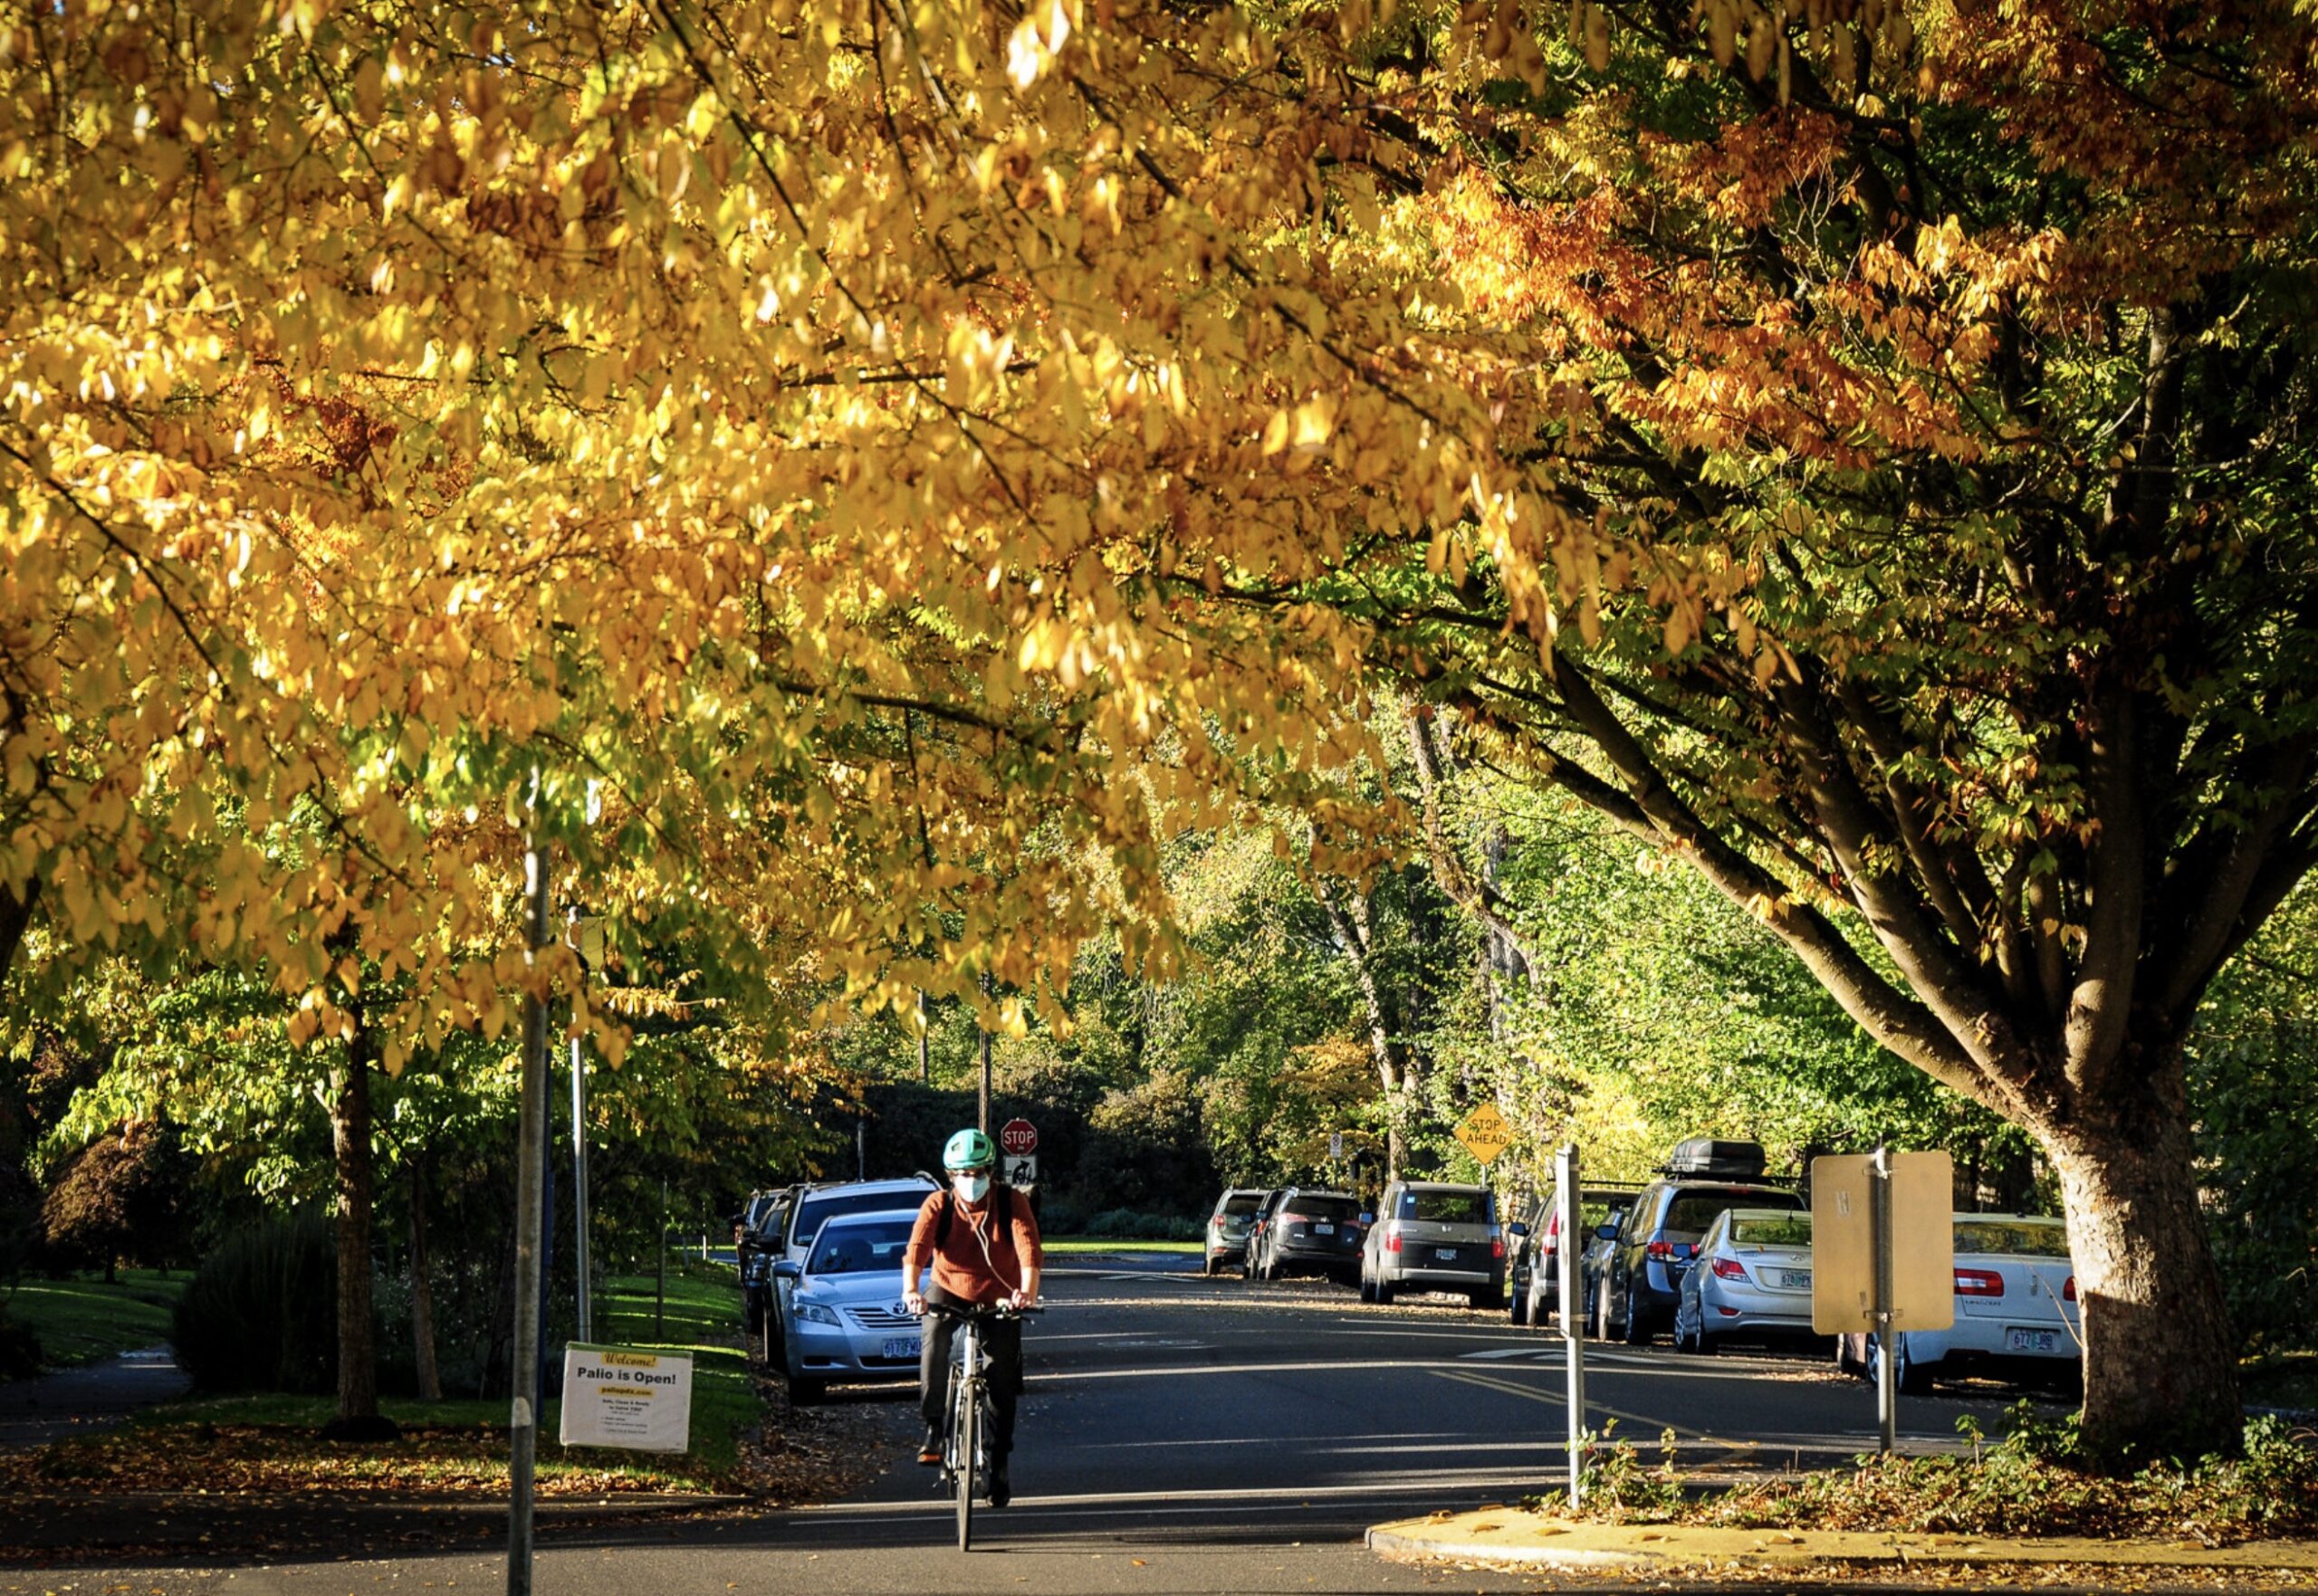 Golden leaves of a tree over a bike rider on a paved urban street.